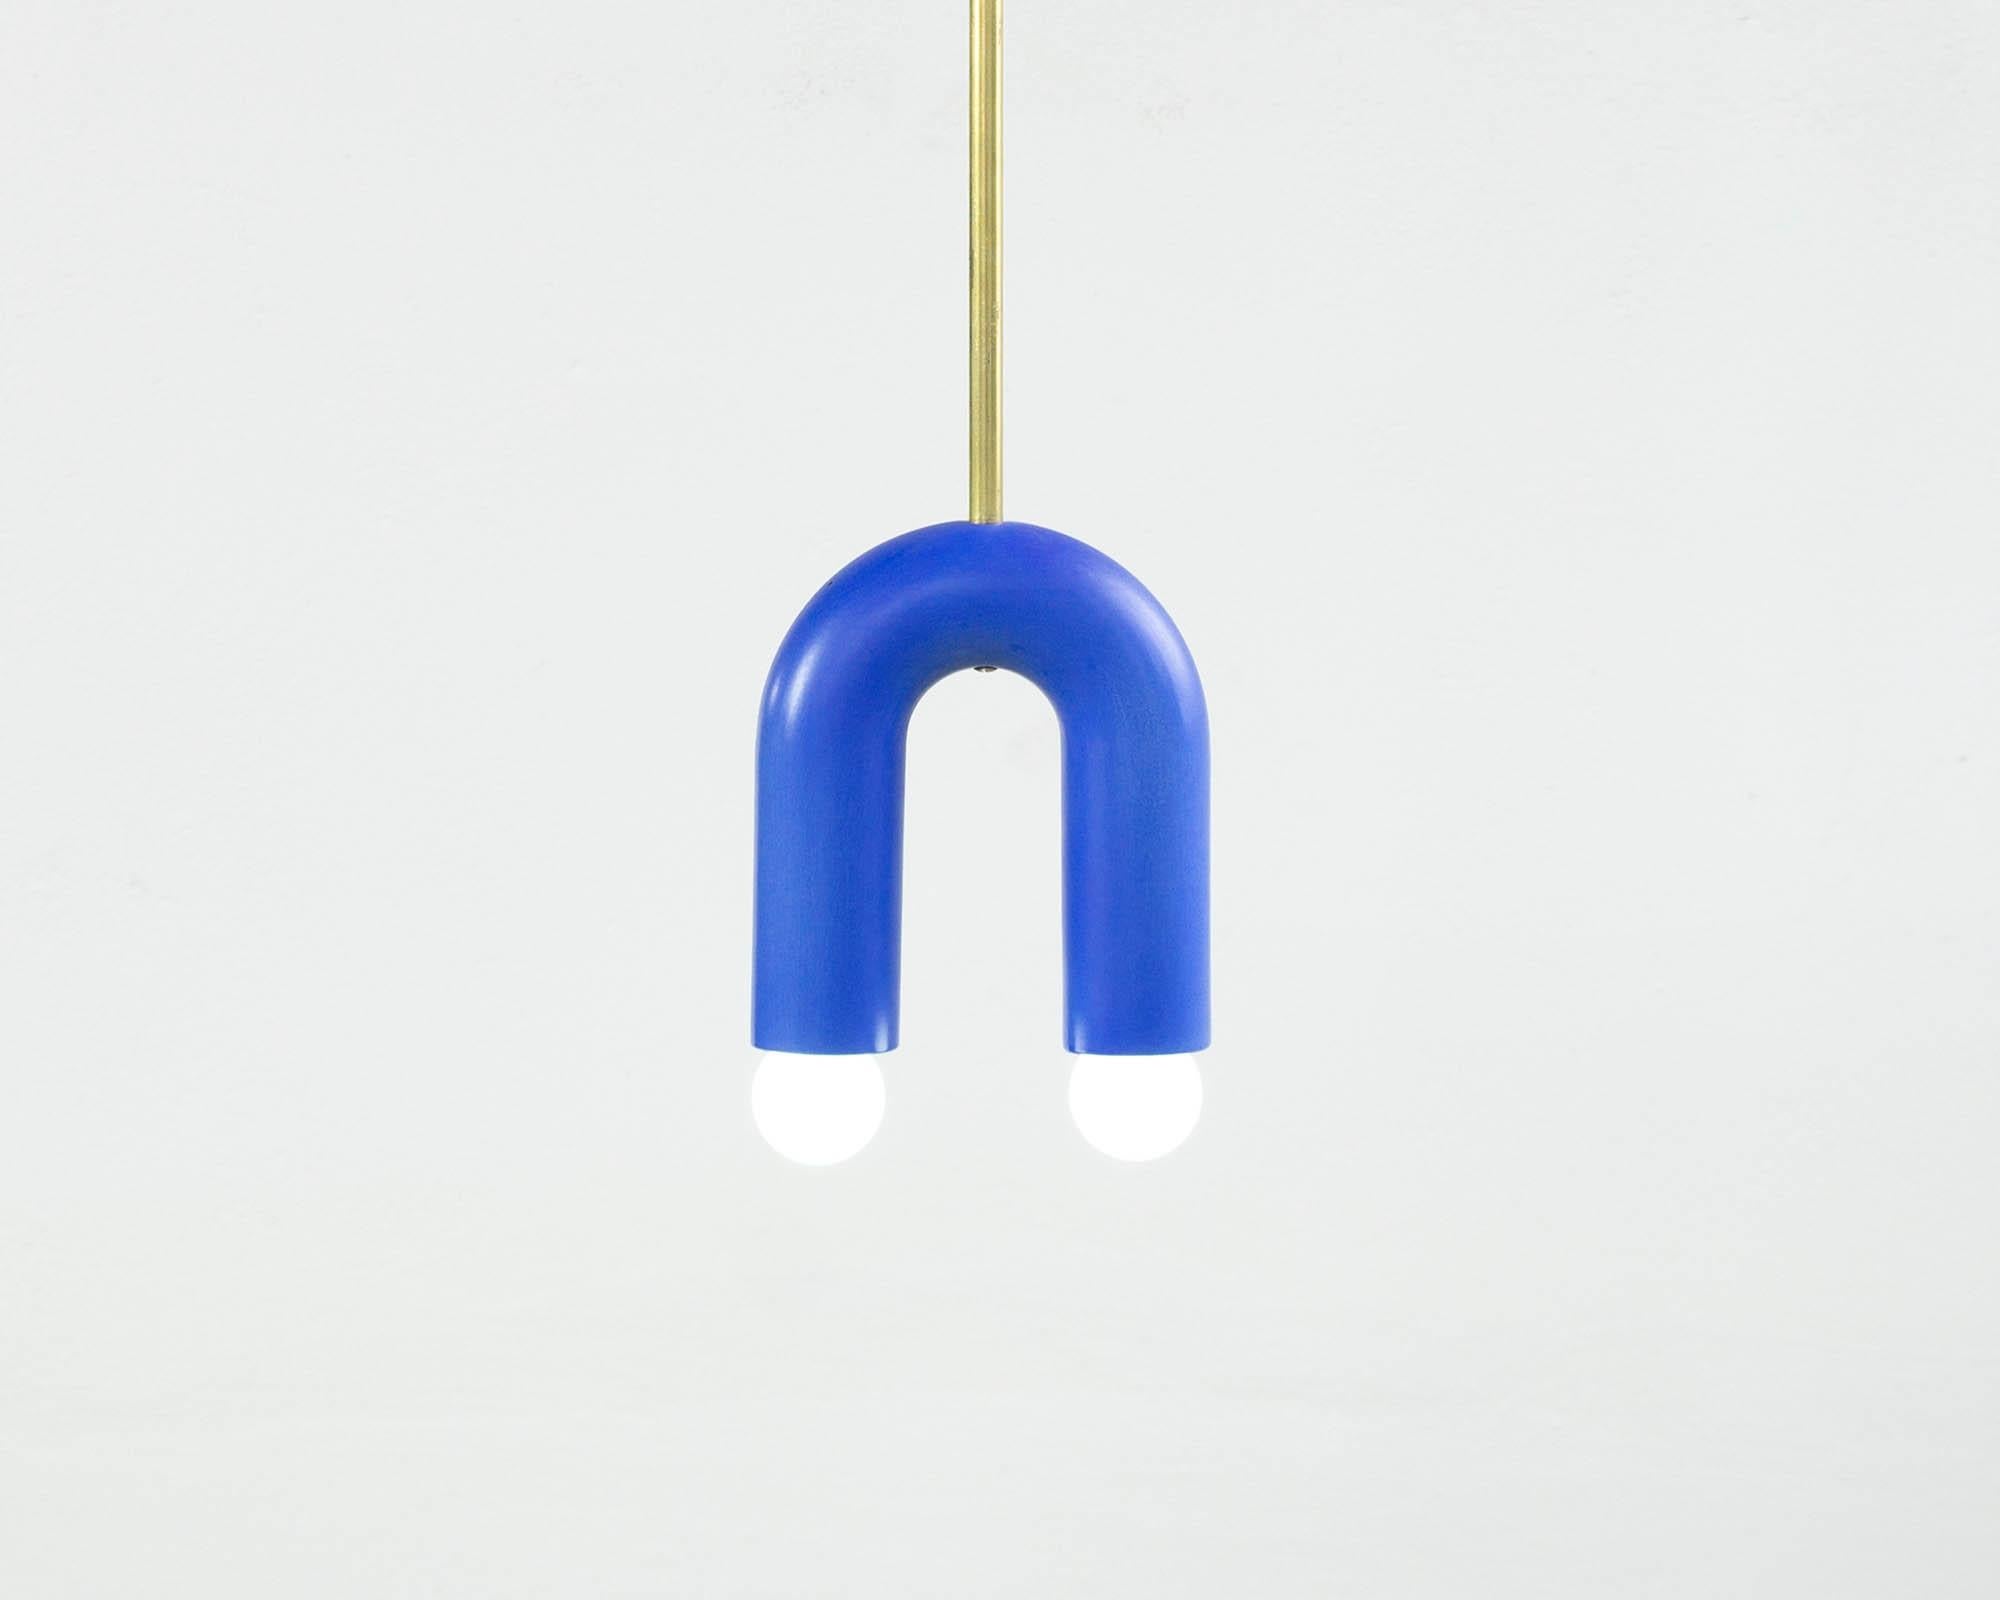 TRN A1 Pendant lamp / ceiling lamp / chandelier 
Designer: Pani Jurek

Dimensions: H. 17.5 x 15 x 5 cm
Model shown: Cobalt blue

Bulb (not included): E27/E26, compatible with US electric system

Materials: Hand glazed ceramic and brass
Rod: brass,